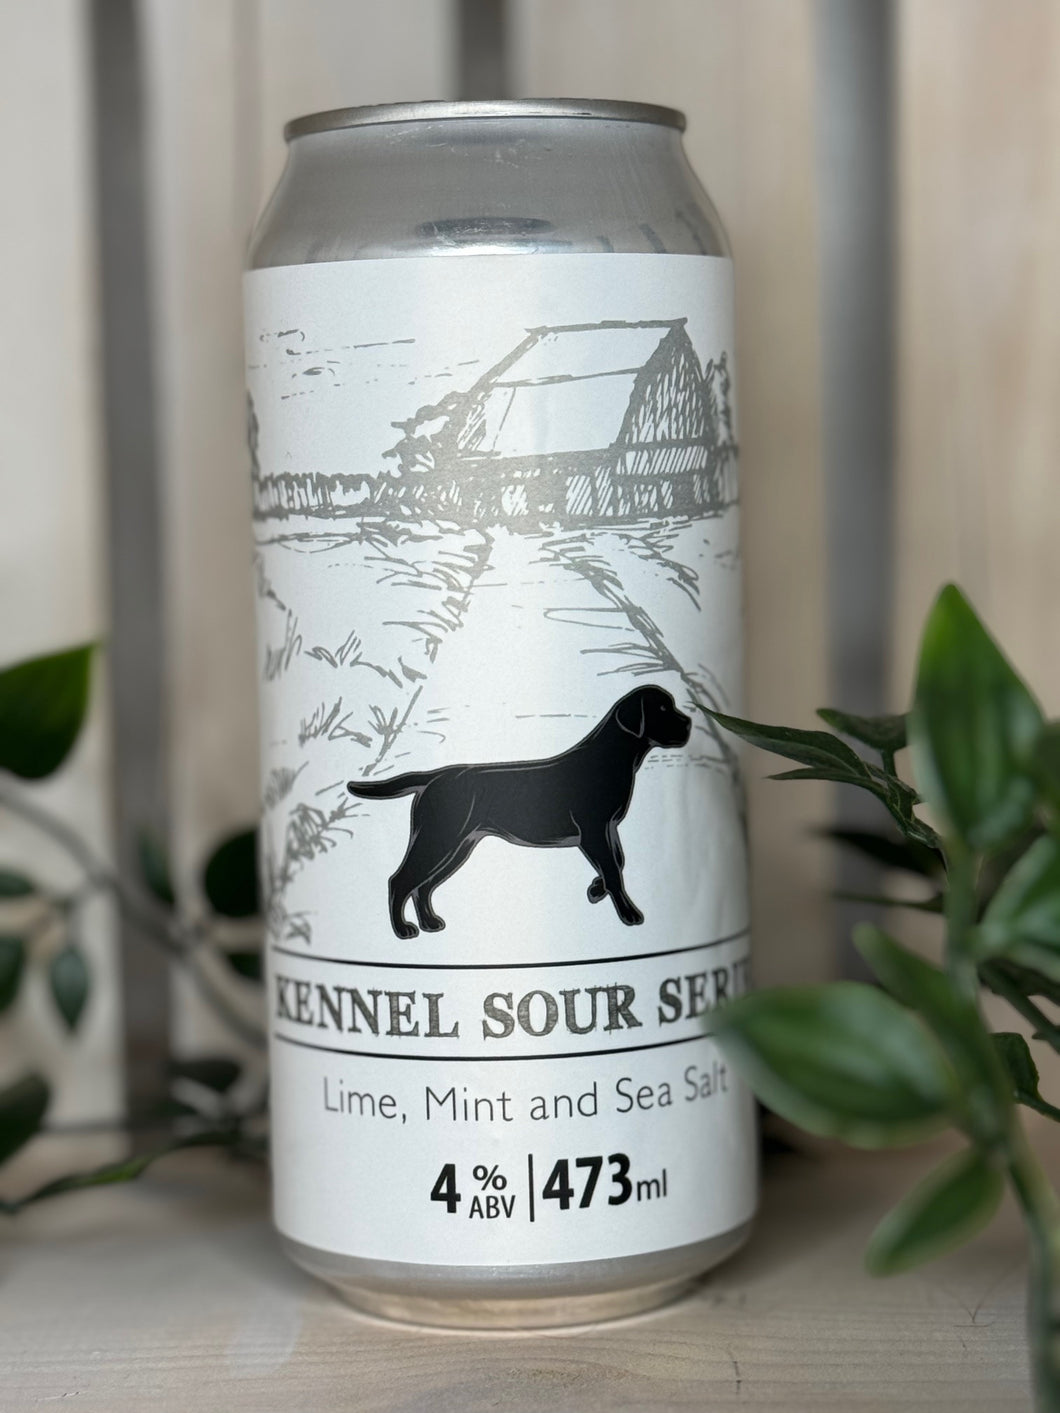 Lime, Mint and Sea Salt Kennel Sour (473ml Can)